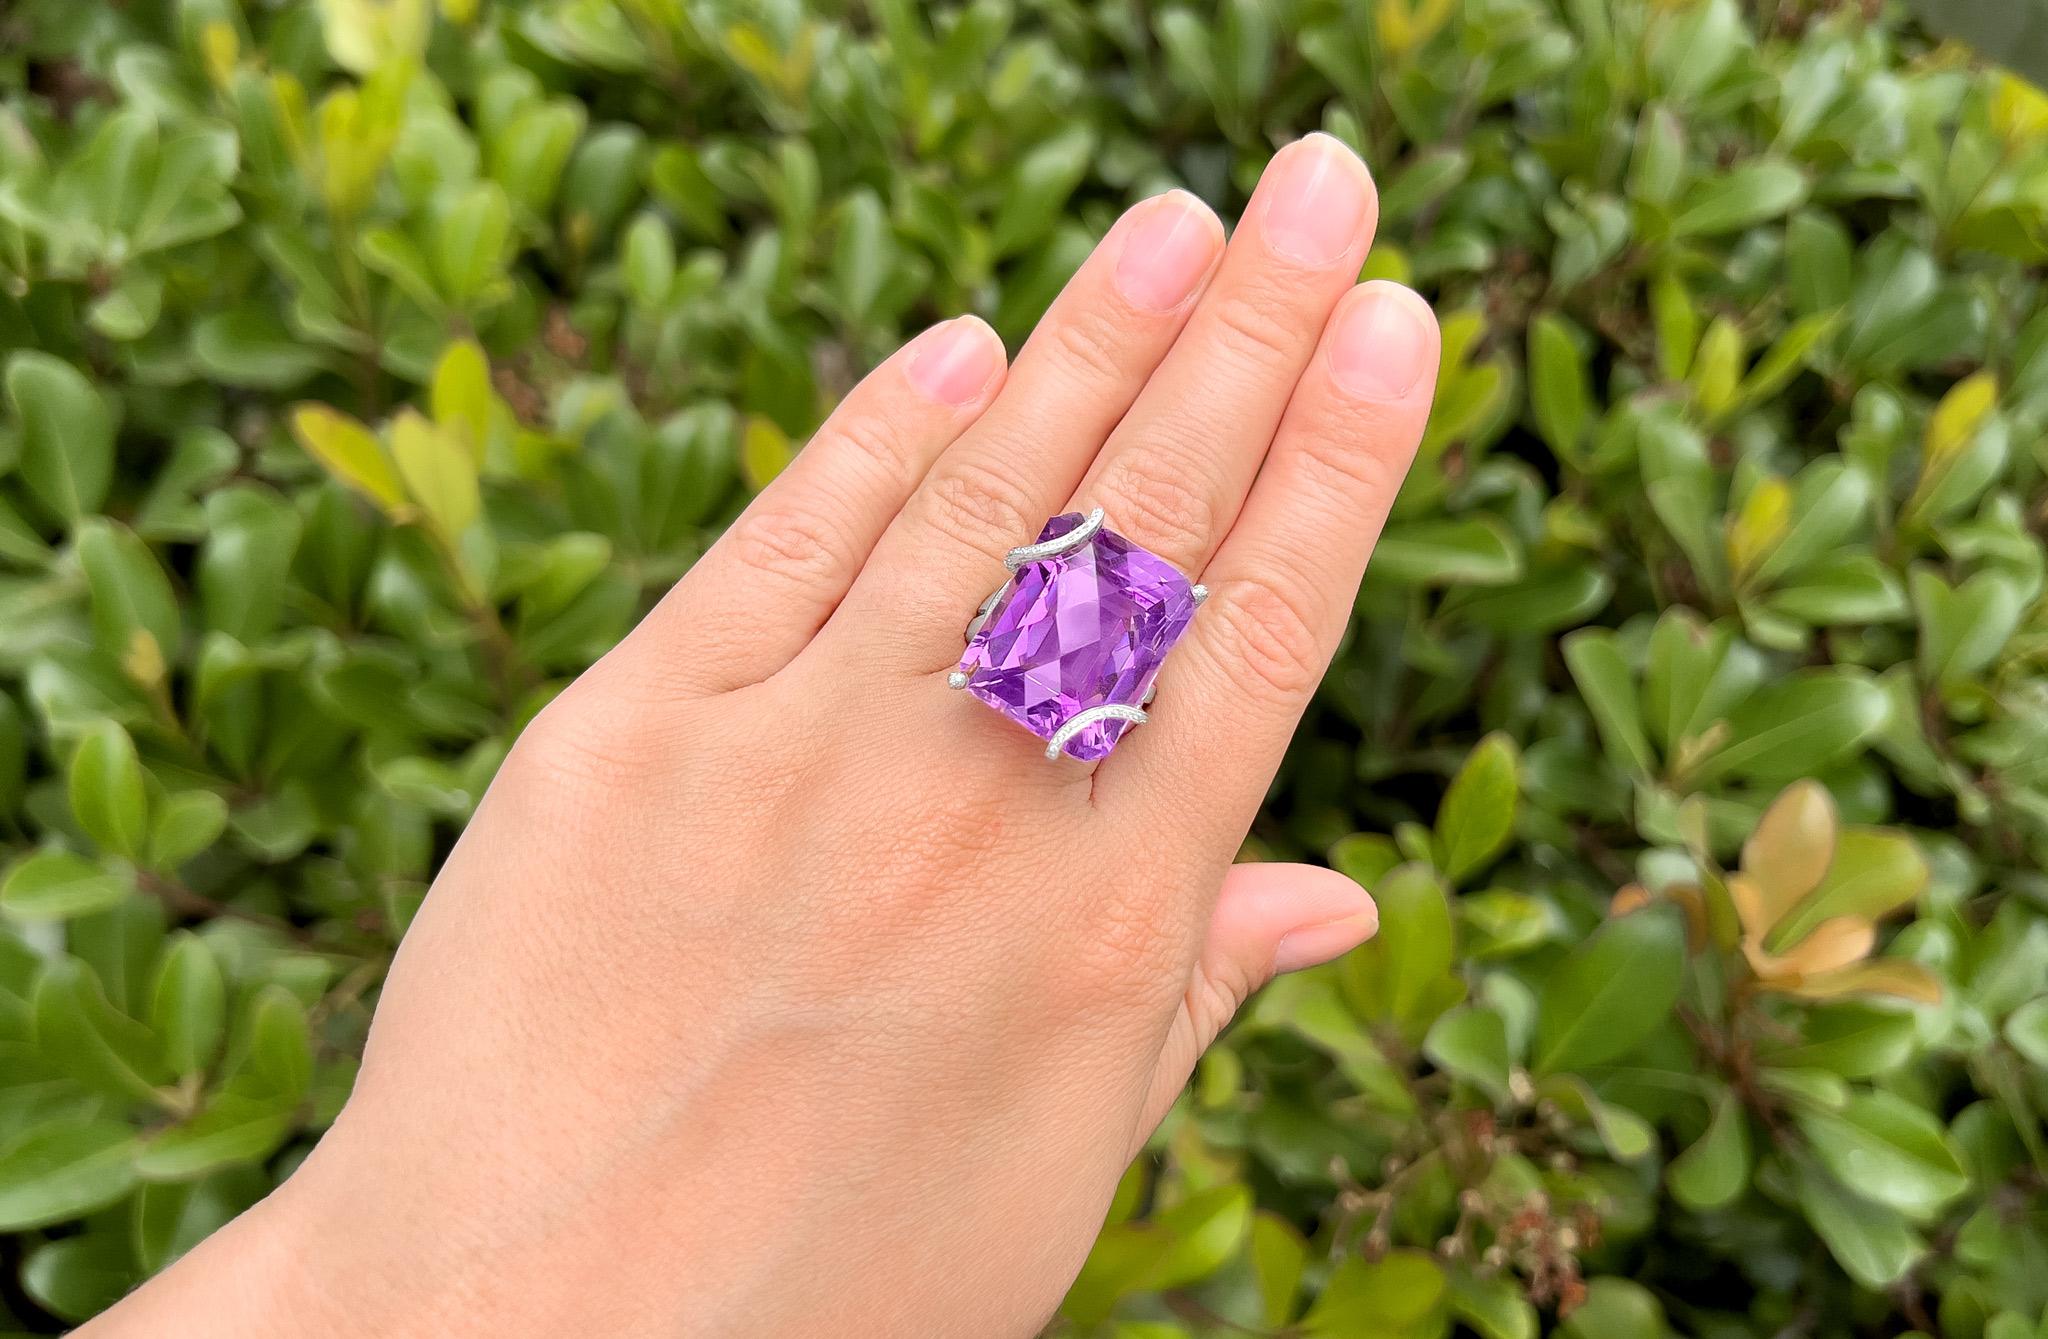 Amethyst  = 30 Carat
Cut: Rose  
Diamonds = 1 Carats
( Color: F, Clarity: VS )
Metal: 18K Gold
Ring Size: 6.25* US
*It can be resized complimentary